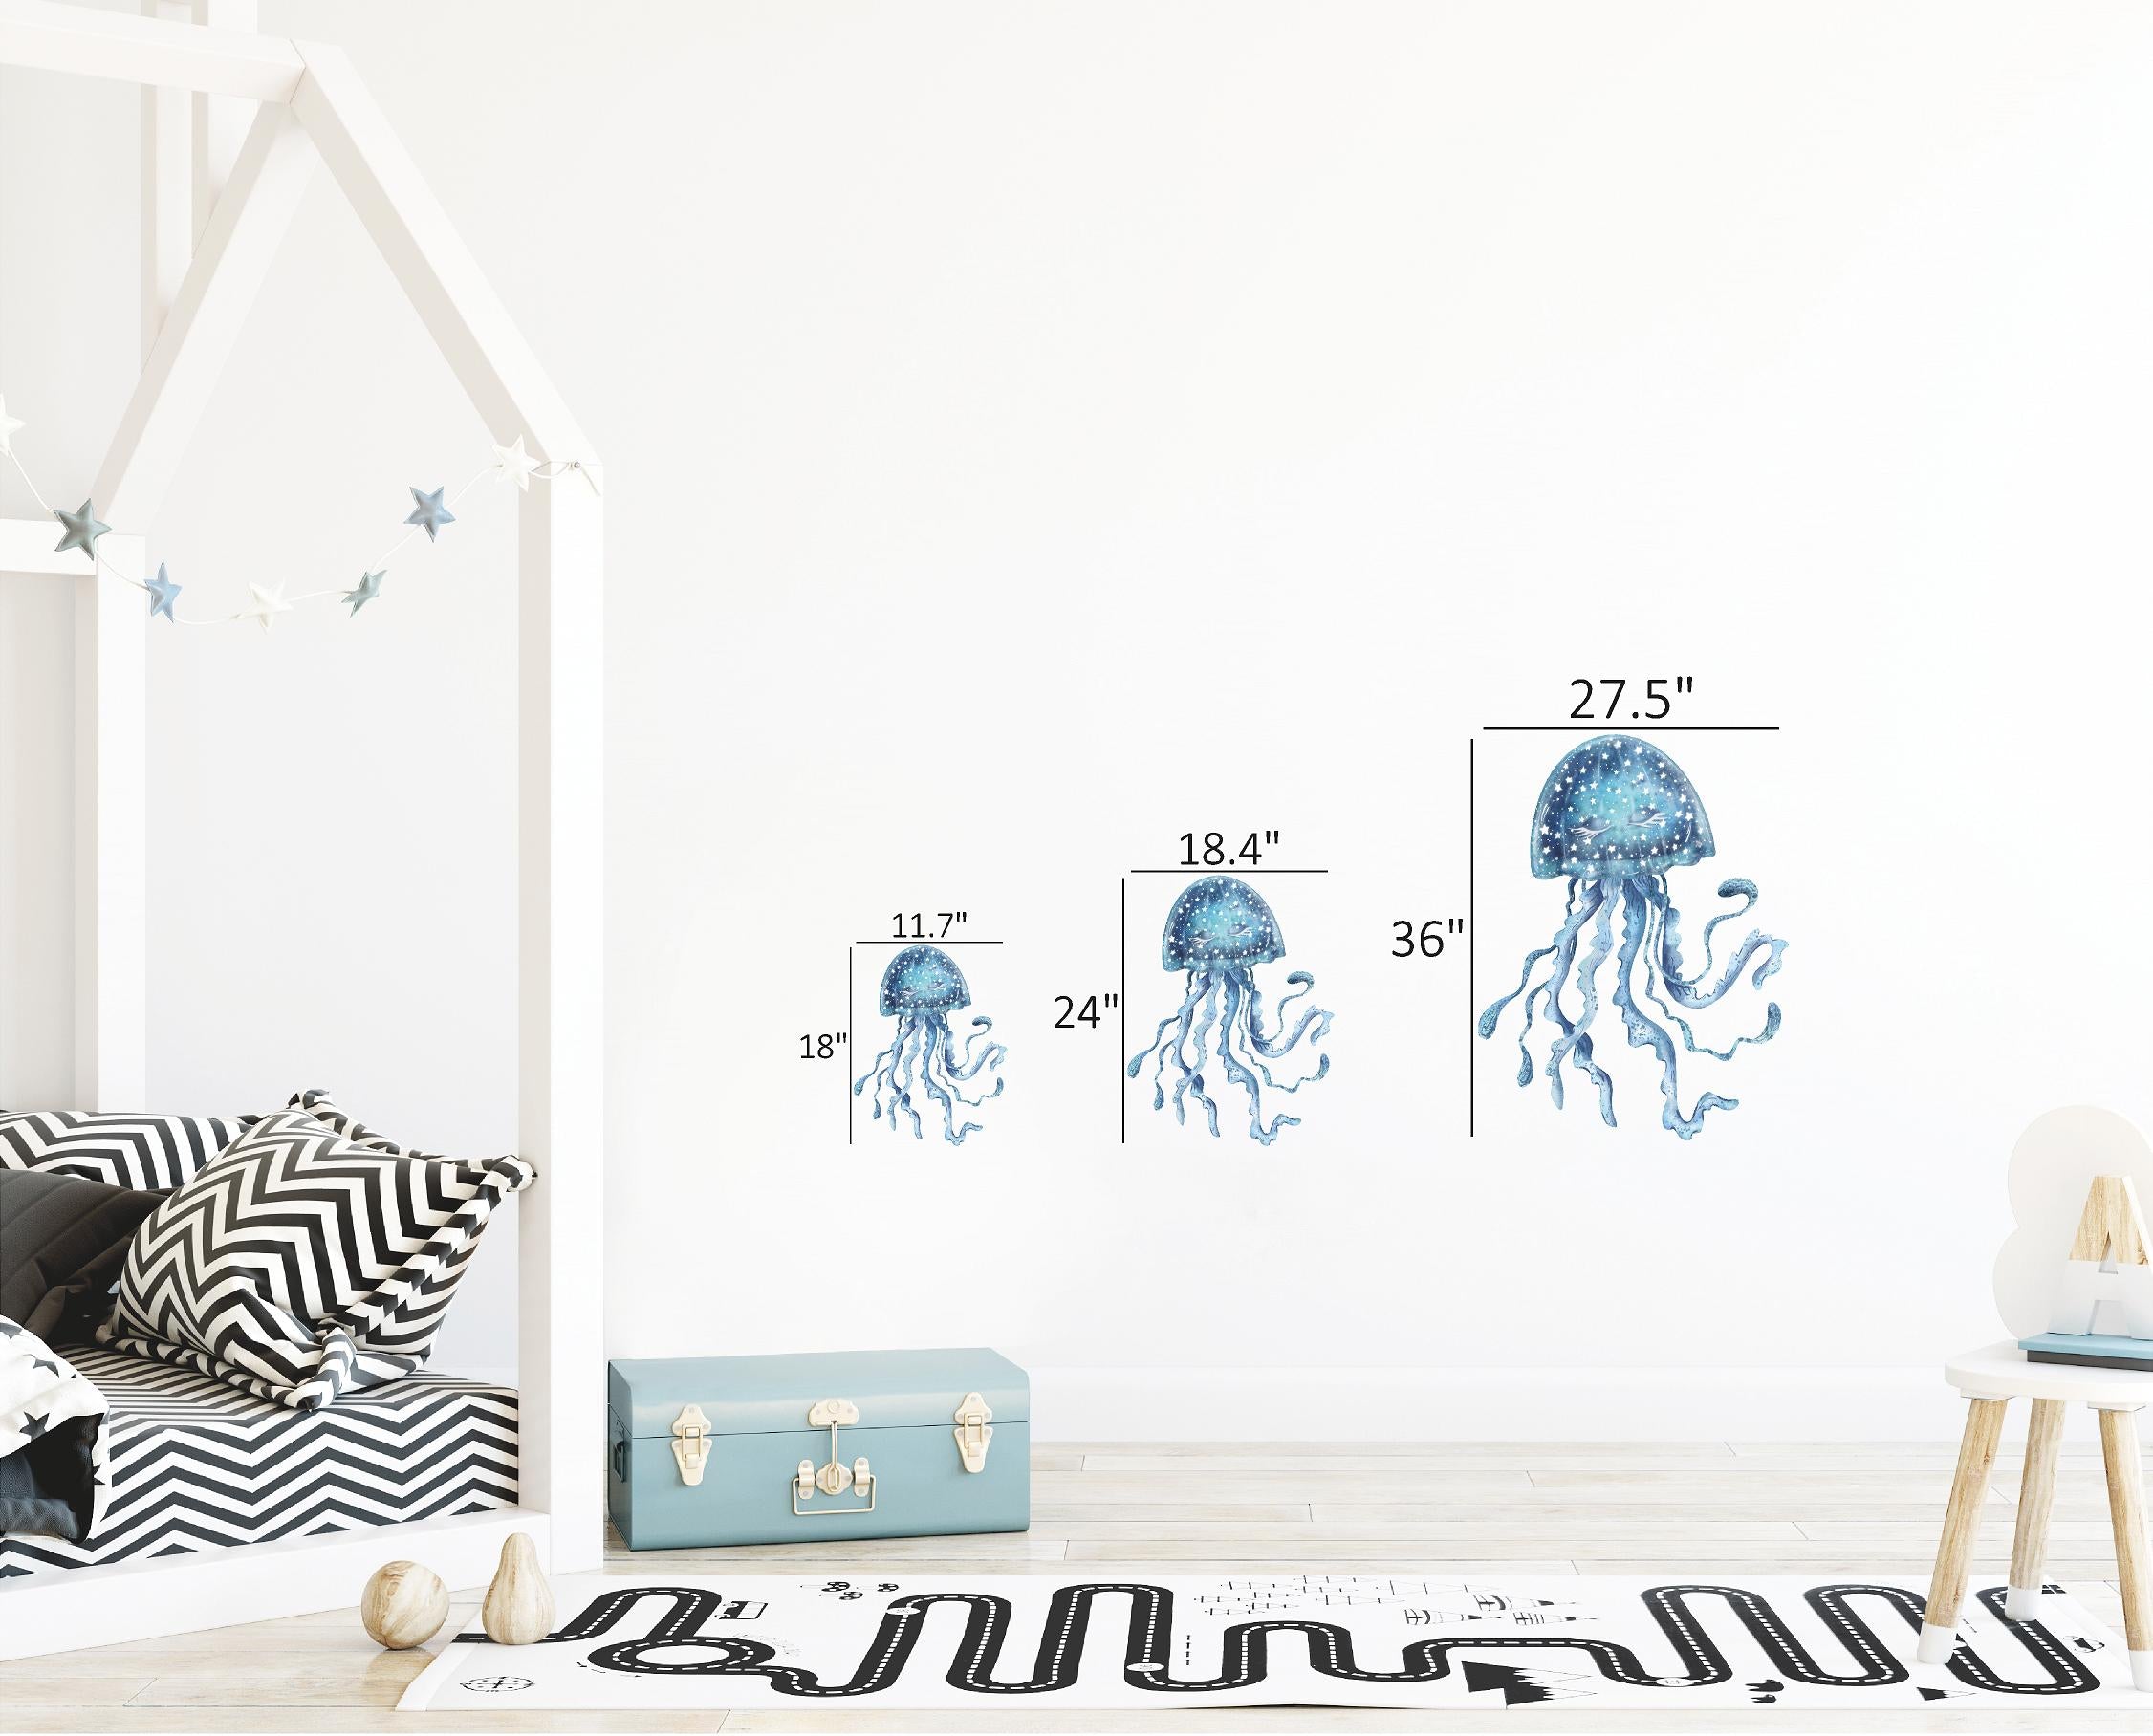 Sleepy Star Jellyfish Wall Decal Removable Fabric Vinyl Watercolor Ocean Sea Animal Whimsical Wall Sticker | DecalBaby